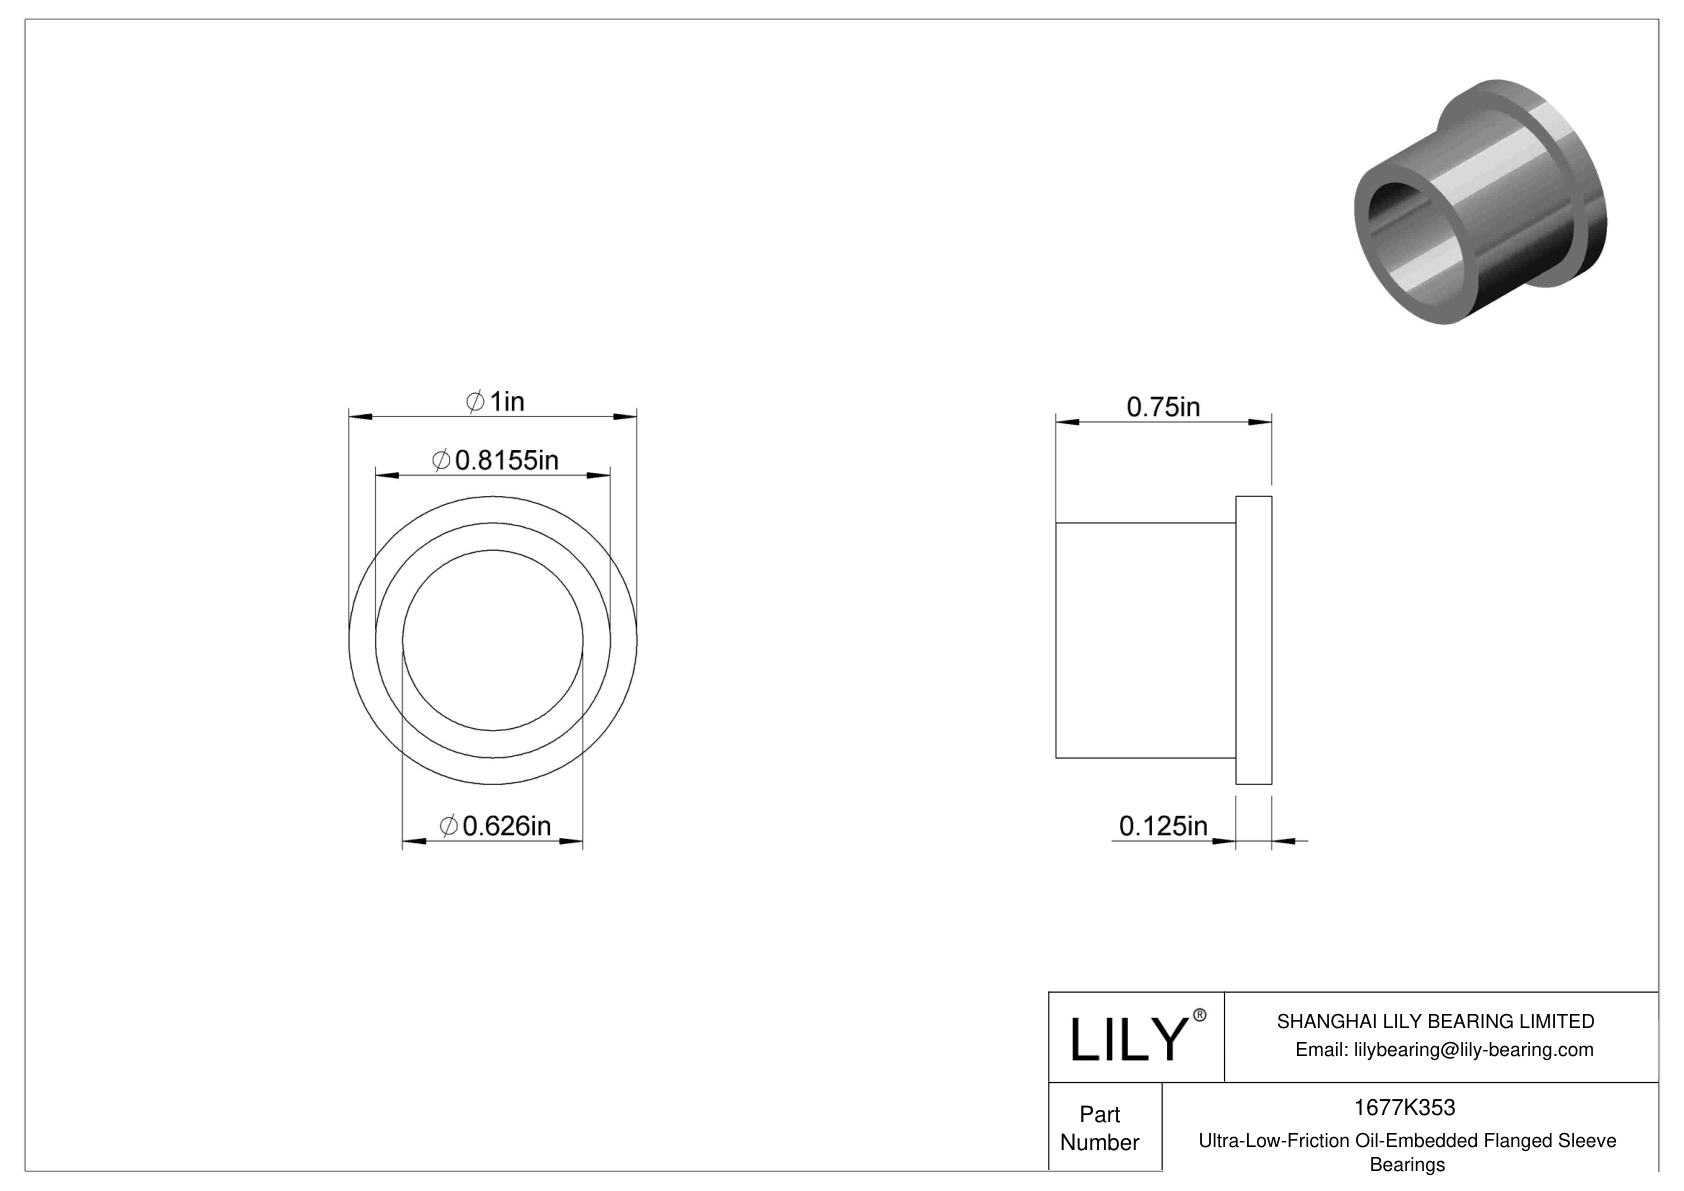 BGHHKDFD Ultra-Low-Friction Oil-Embedded Flanged Sleeve Bearings cad drawing